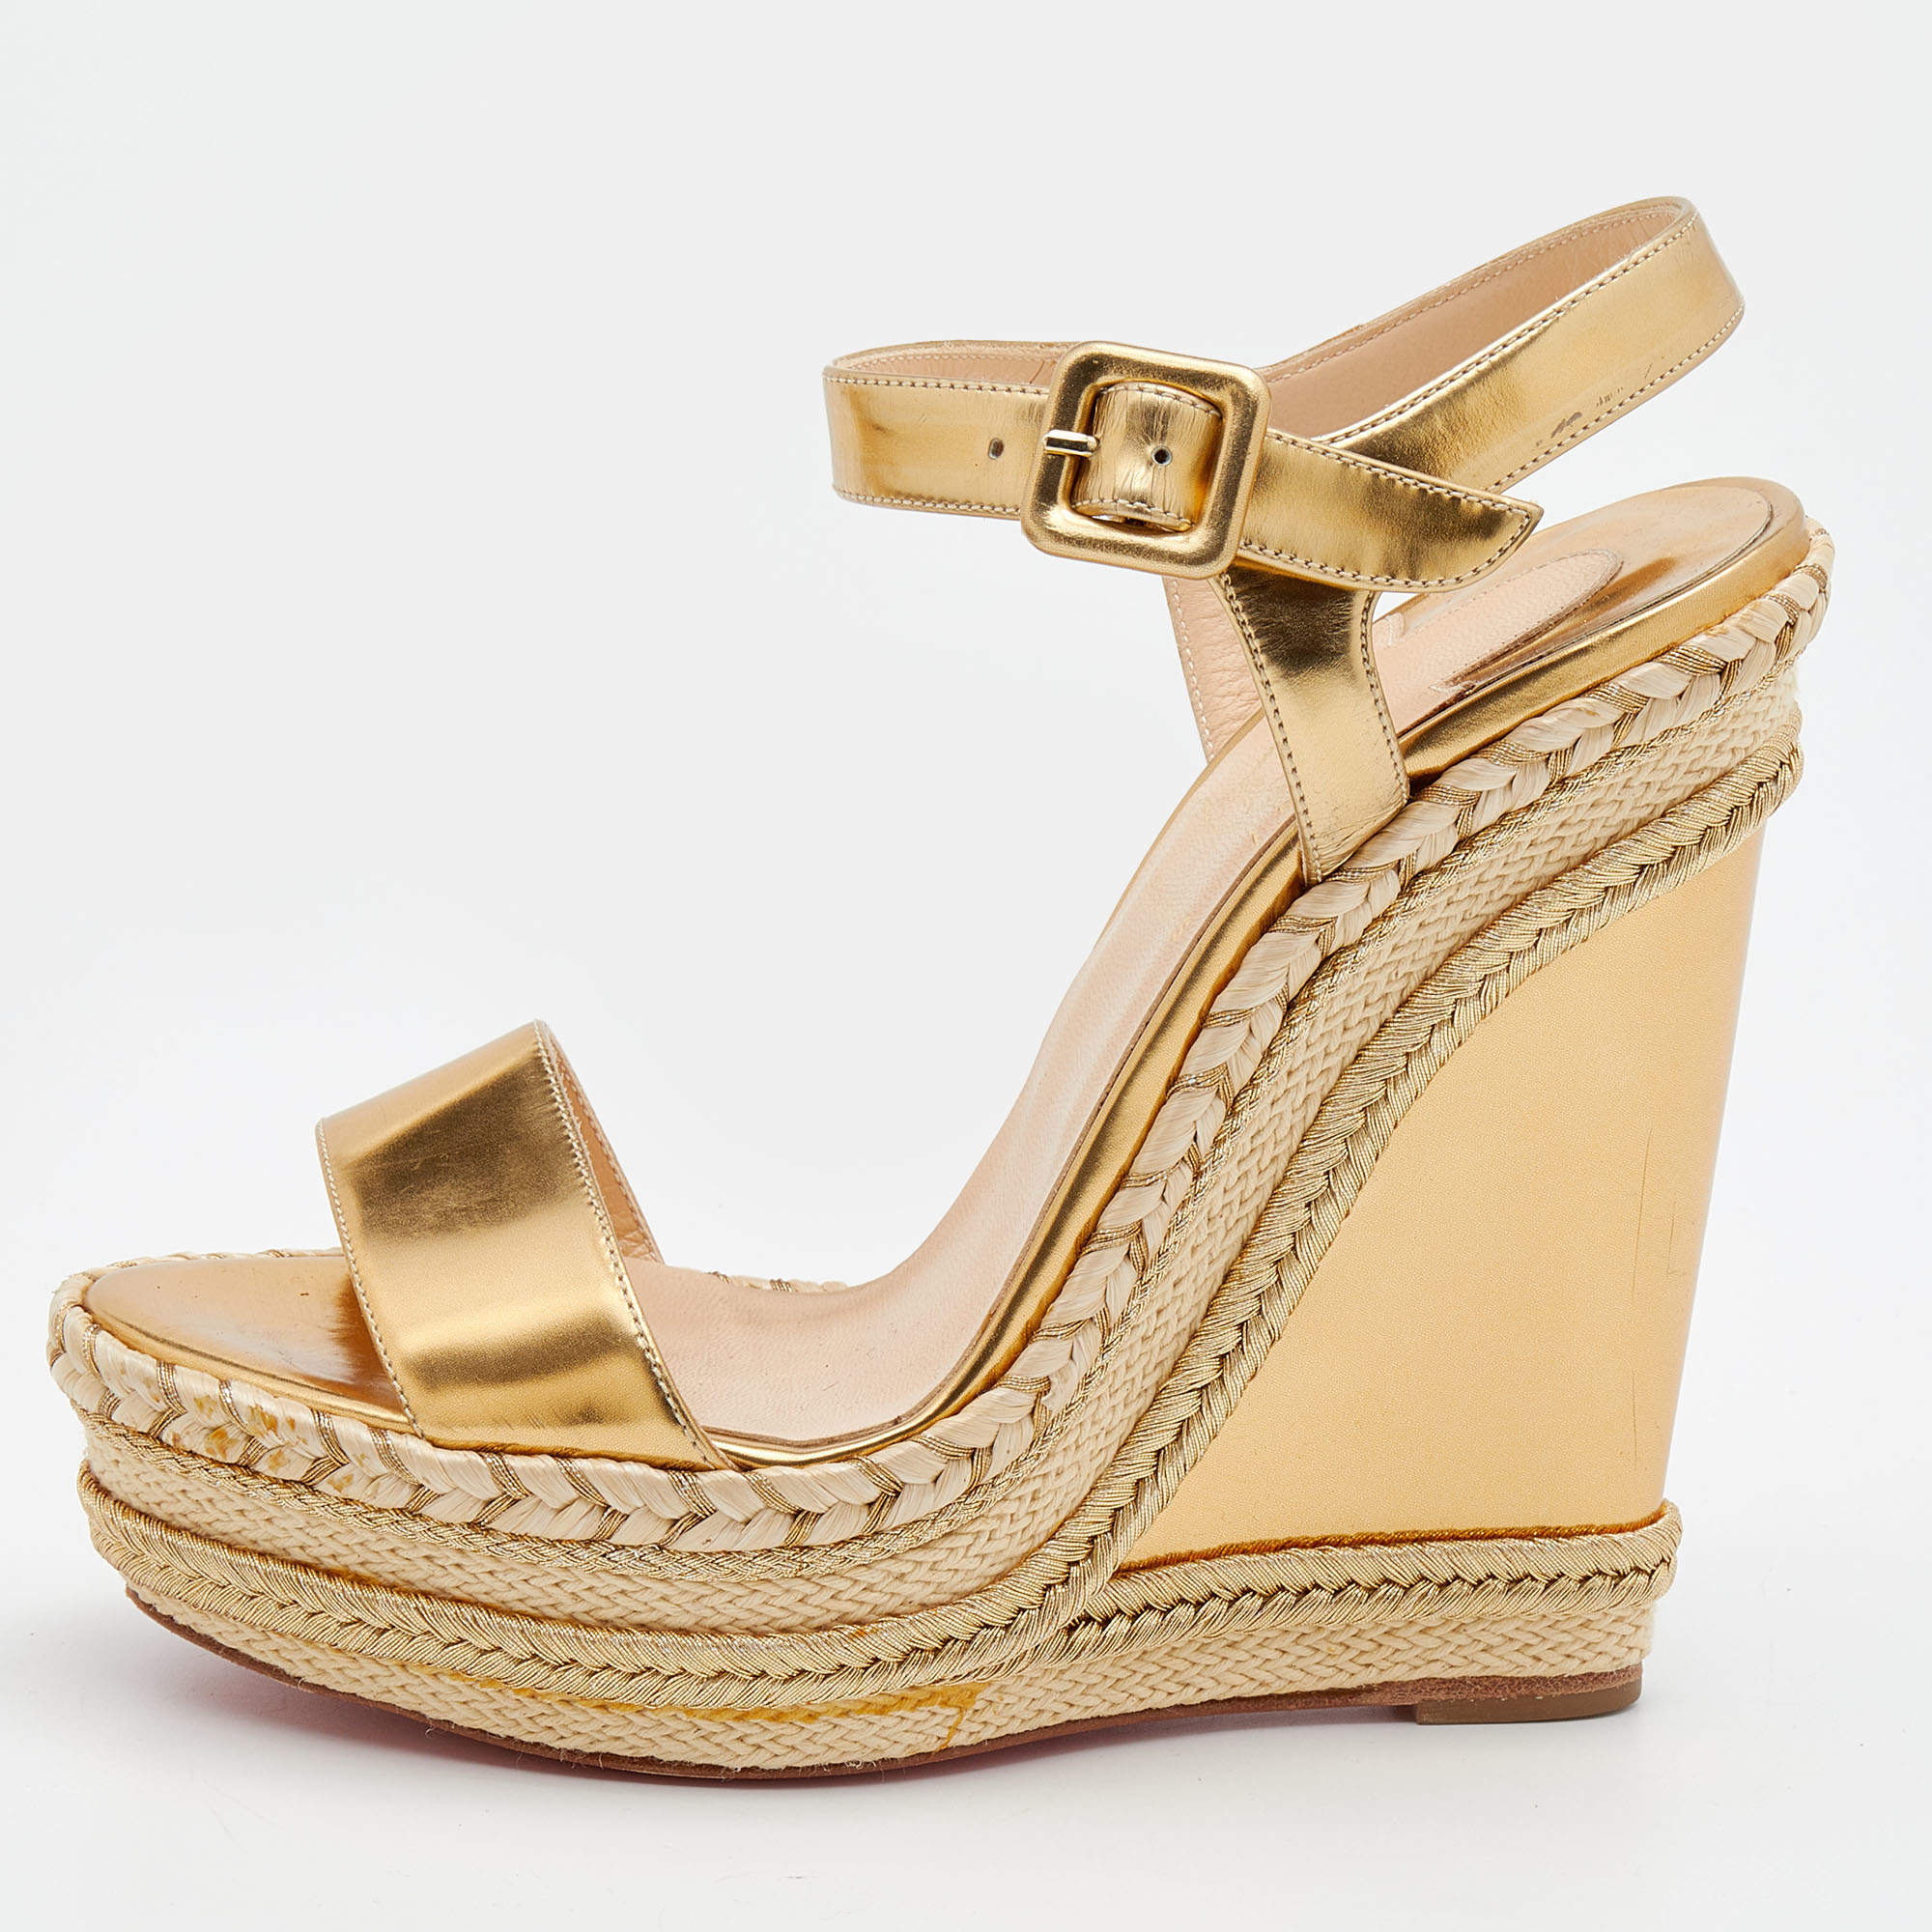 Christian Louboutin Metallic Gold Leather New Duplice Ankle Strap Wedge Platform Sandals Size 37